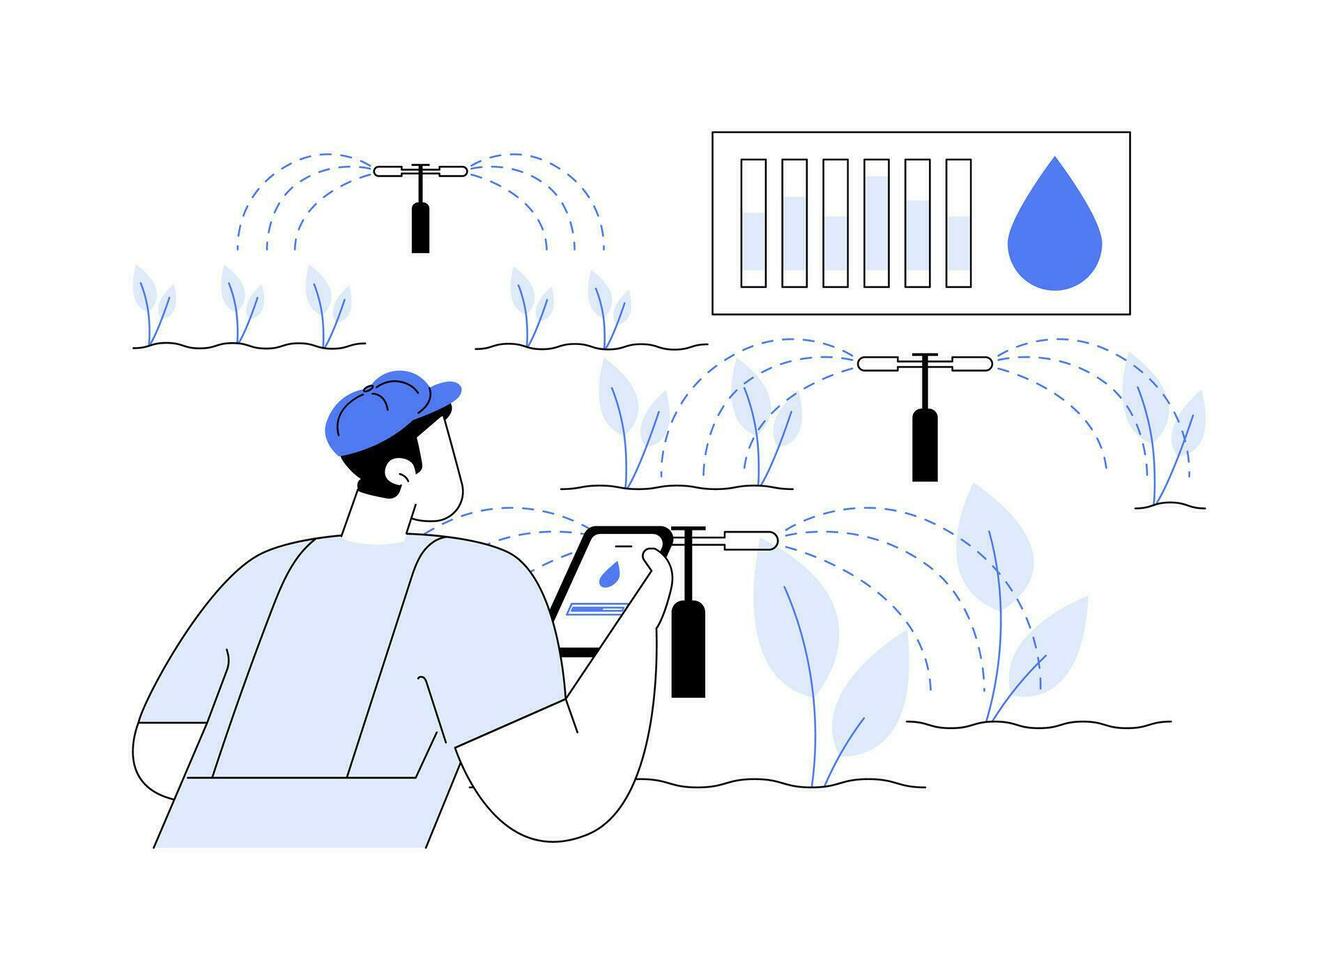 Irrigation monitoring abstract concept vector illustration.